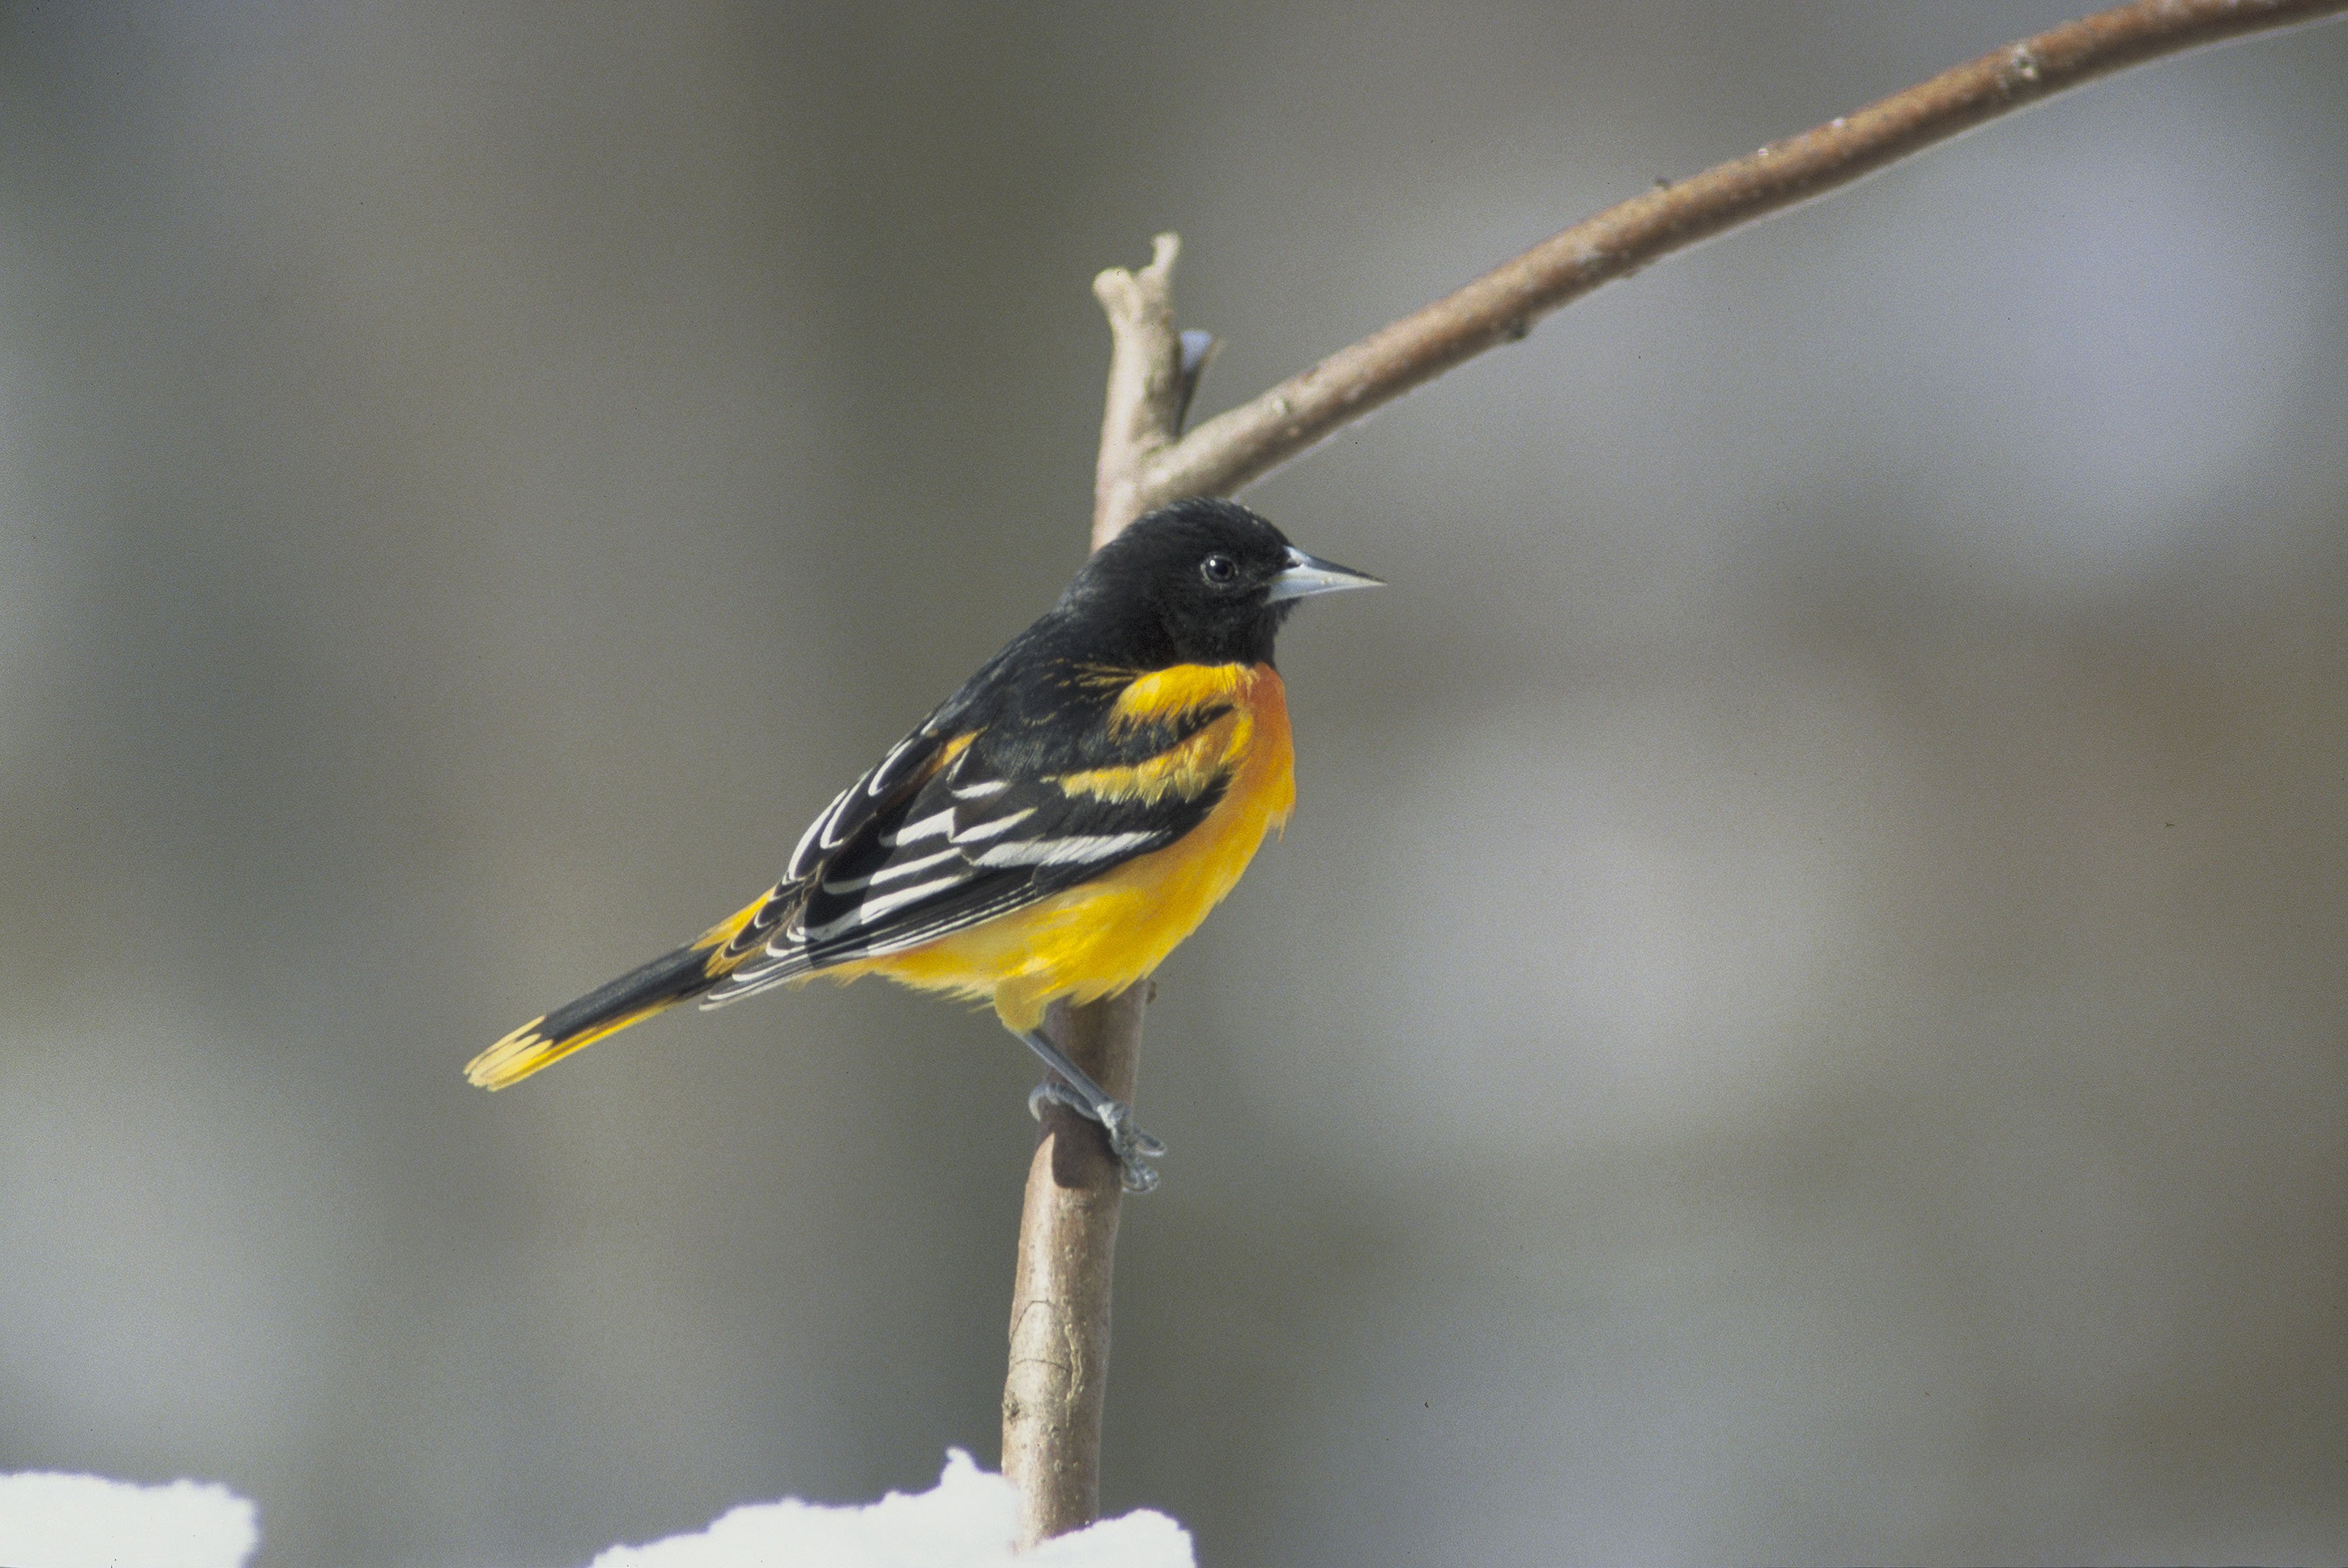 Photo of the Week - Male Baltimore Oriole